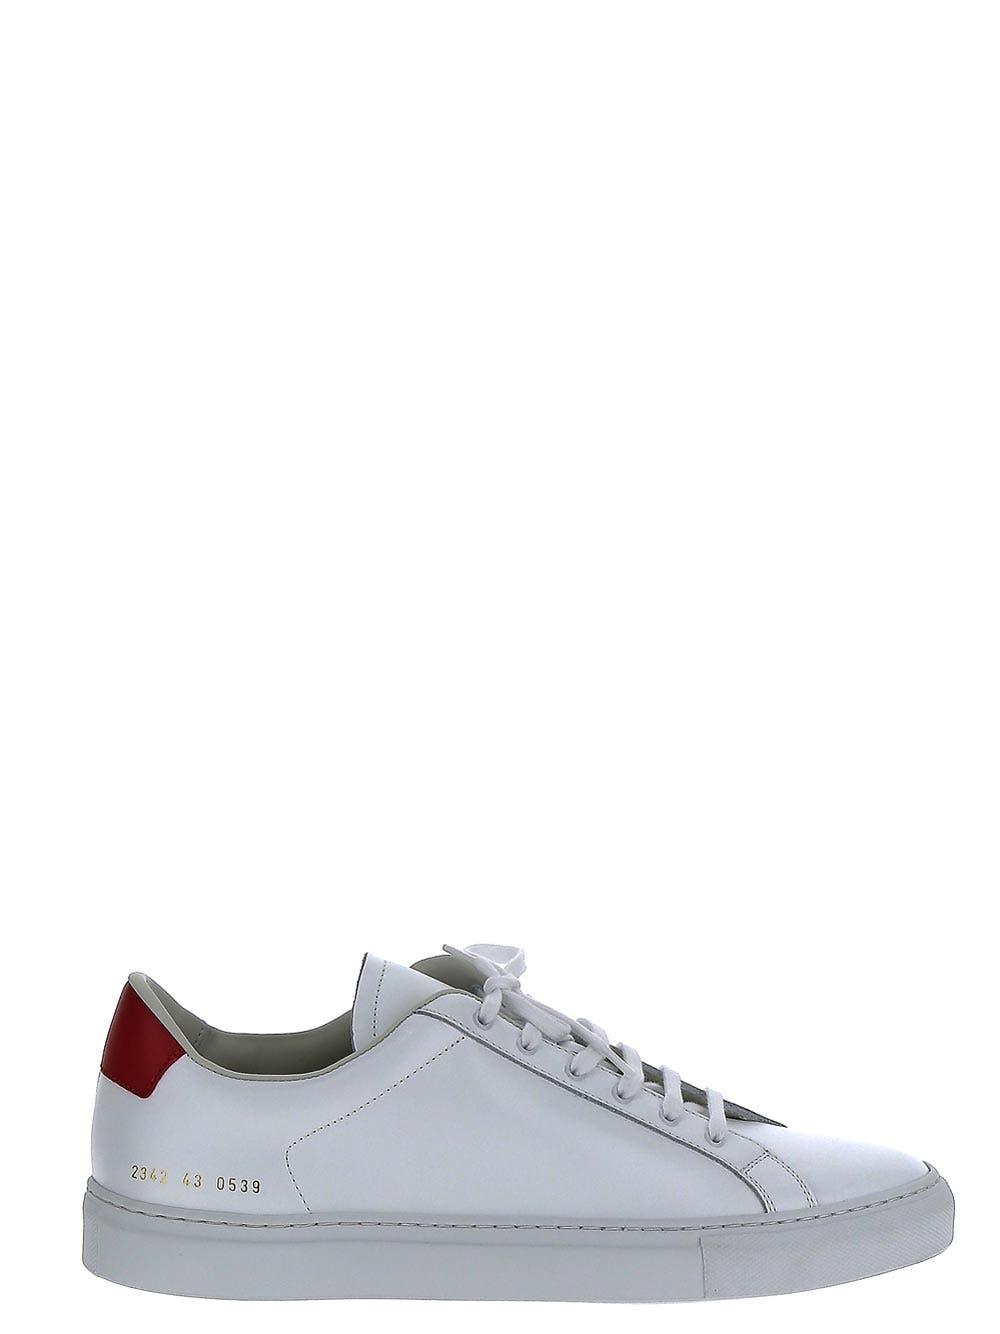 Common Projects Retro Low Sneakers